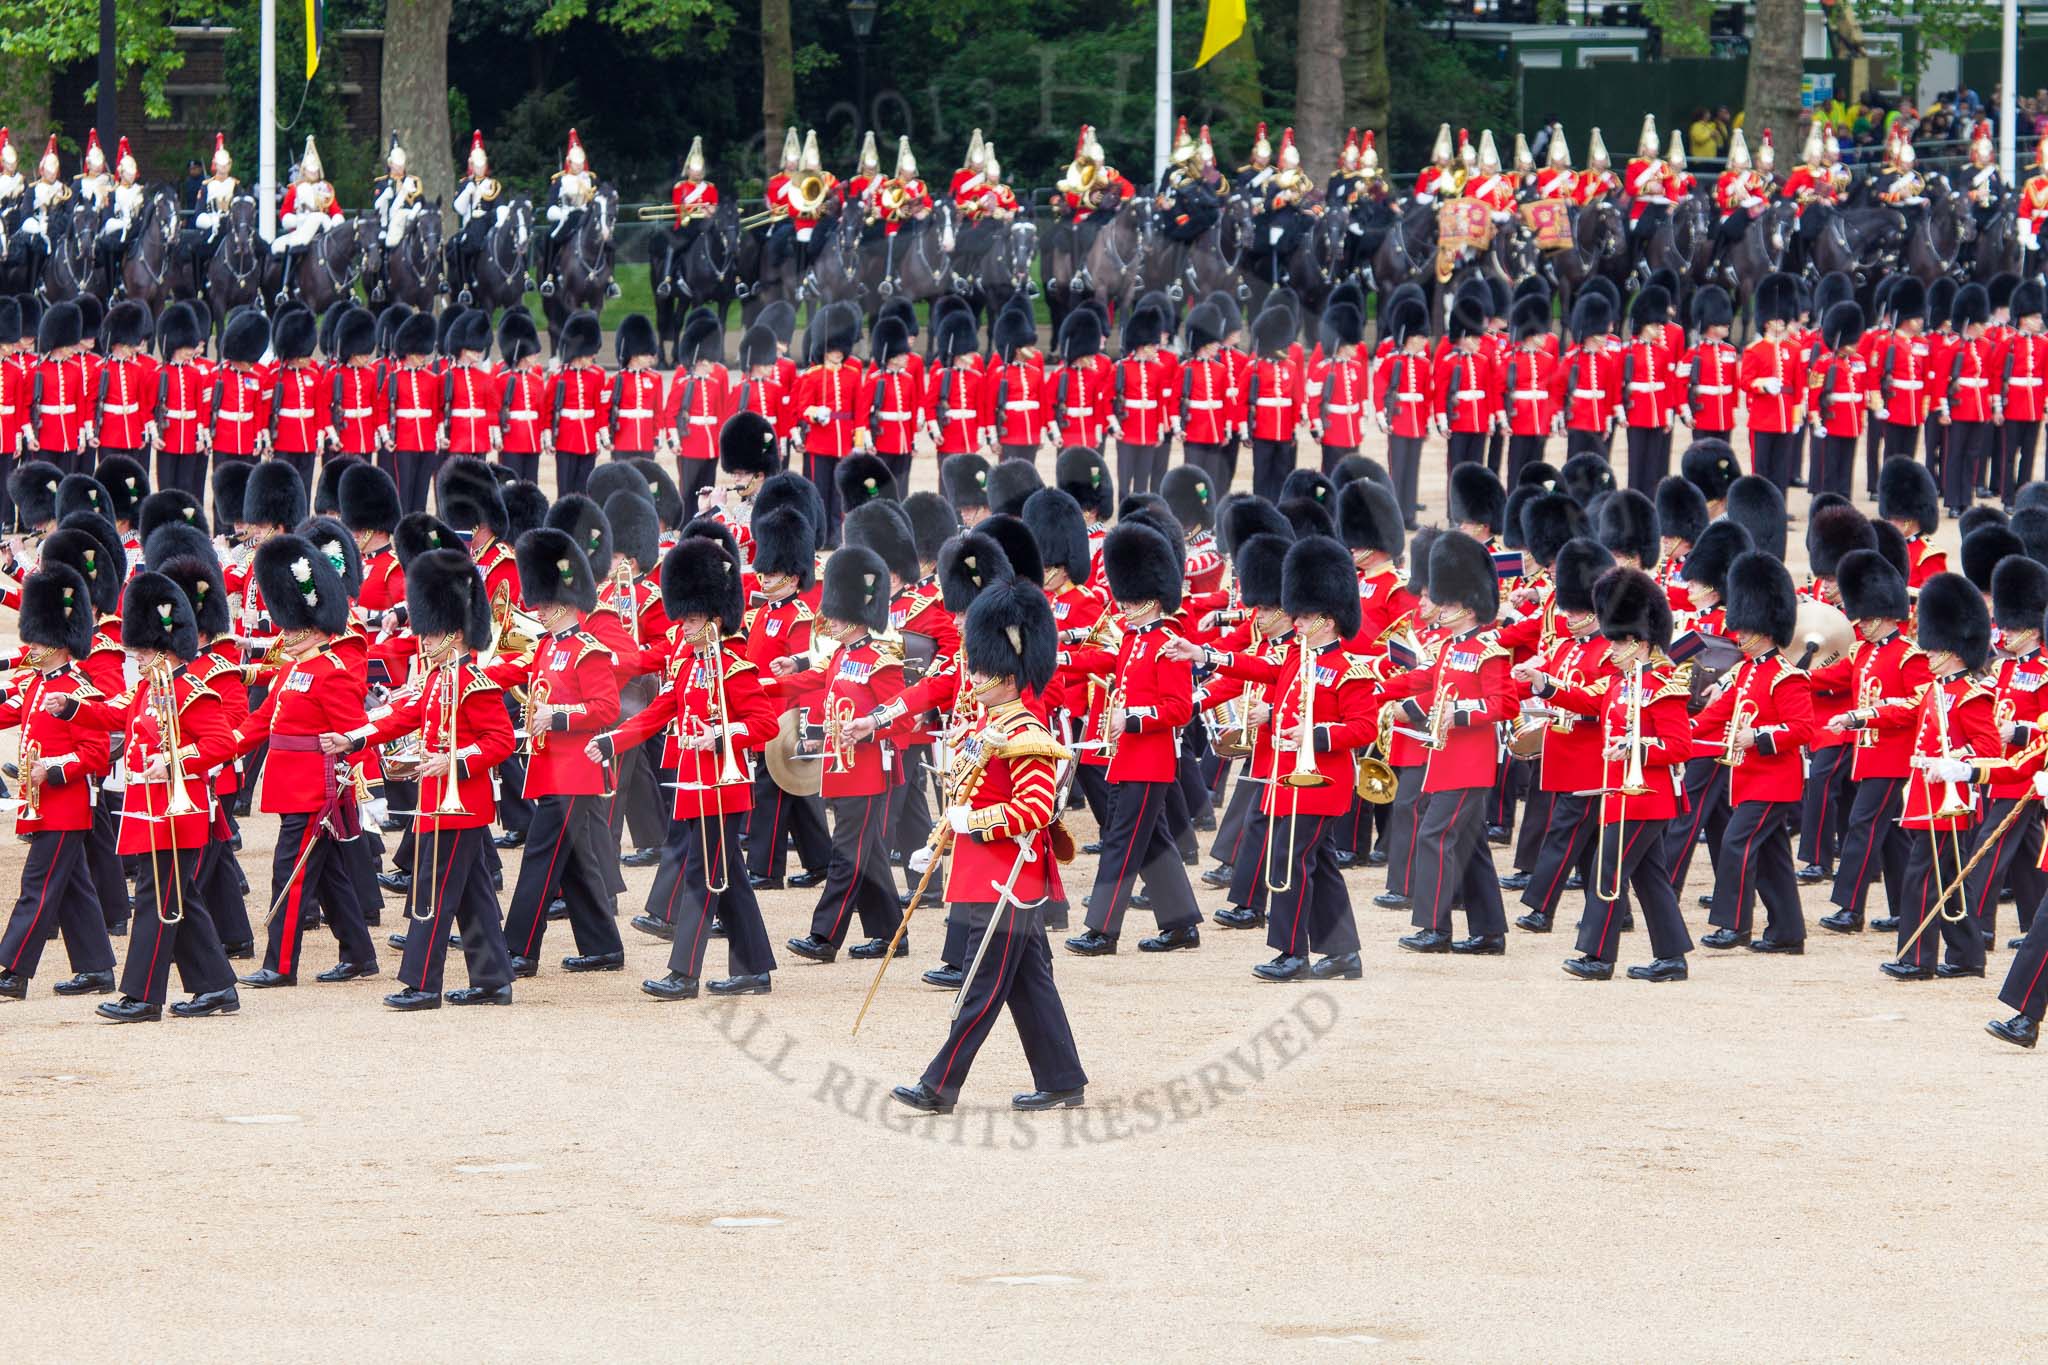 Major General's Review 2013: The Massed Band march away to leave room for  the Mounted Bands..
Horse Guards Parade, Westminster,
London SW1,

United Kingdom,
on 01 June 2013 at 11:48, image #564